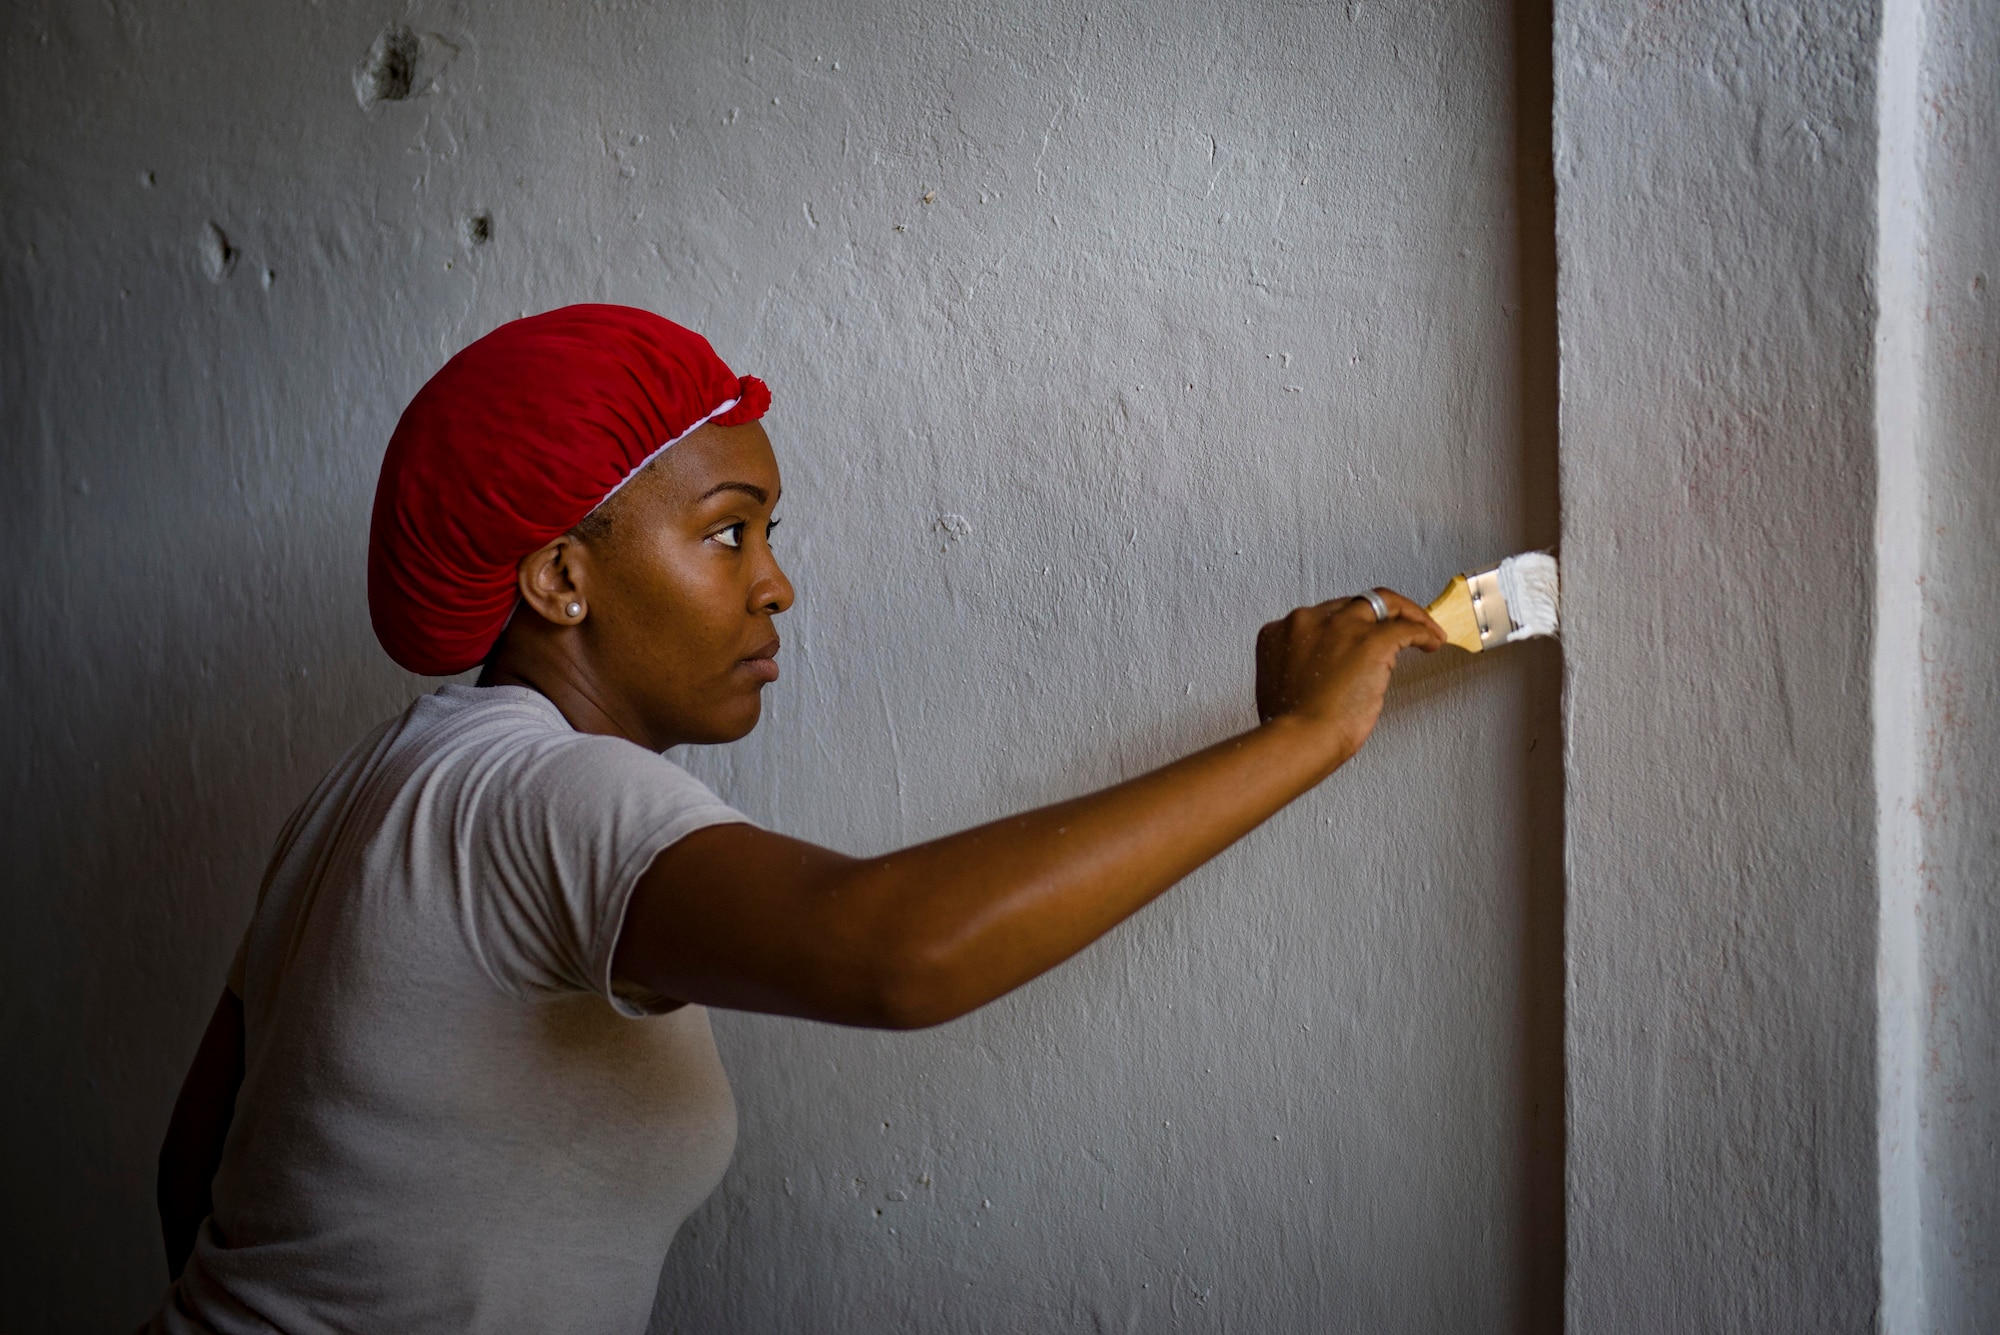 Tech. Sgt. Latrisha Skinner, Pacific Angel 15-2 optometrist, helps paint a health university building during a PACANGEL engineering project Sept 12, 2015, in Baucau, Timor-Leste. Efforts undertaken during Pacific Angel help multilateral militaries in the Pacific improve and build relationships across a wide spectrum of civic operations, which bolsters each nation’s capacity to respond and support future humanitarian assistance and disaster relief operations. (U.S. Air Force photo by Staff Sgt. Alexander W. Riedel/Released)